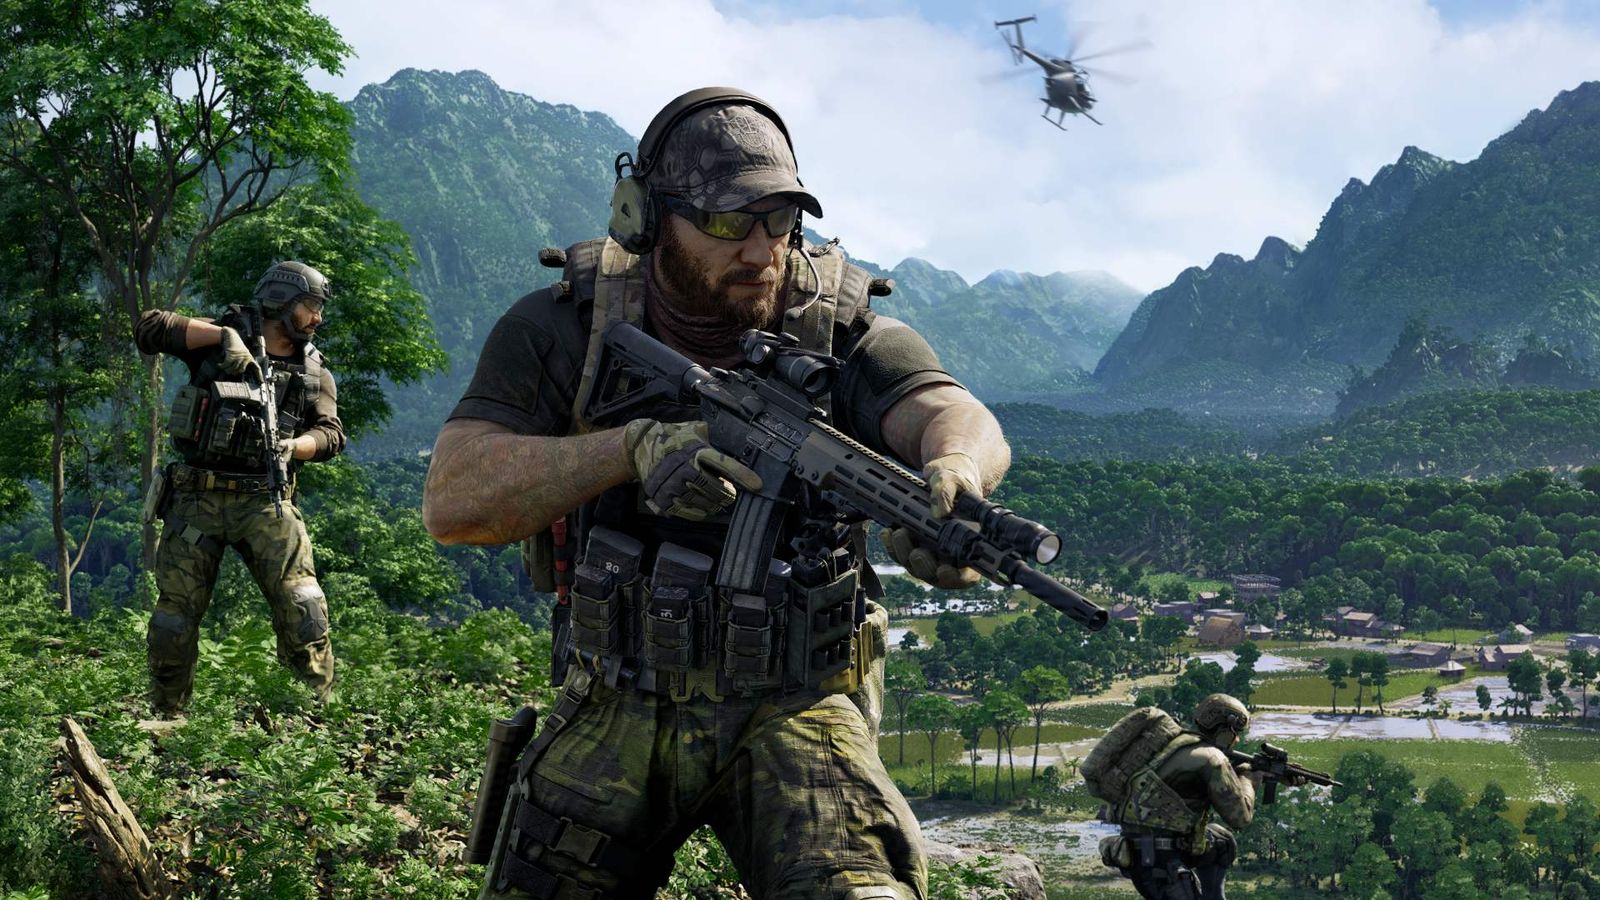 Gray Zone Warfare weapons: A soldier wearing tactical gear and holding an assault rifle at the ready, with two soldiers behind them overlooking the tropical environment.